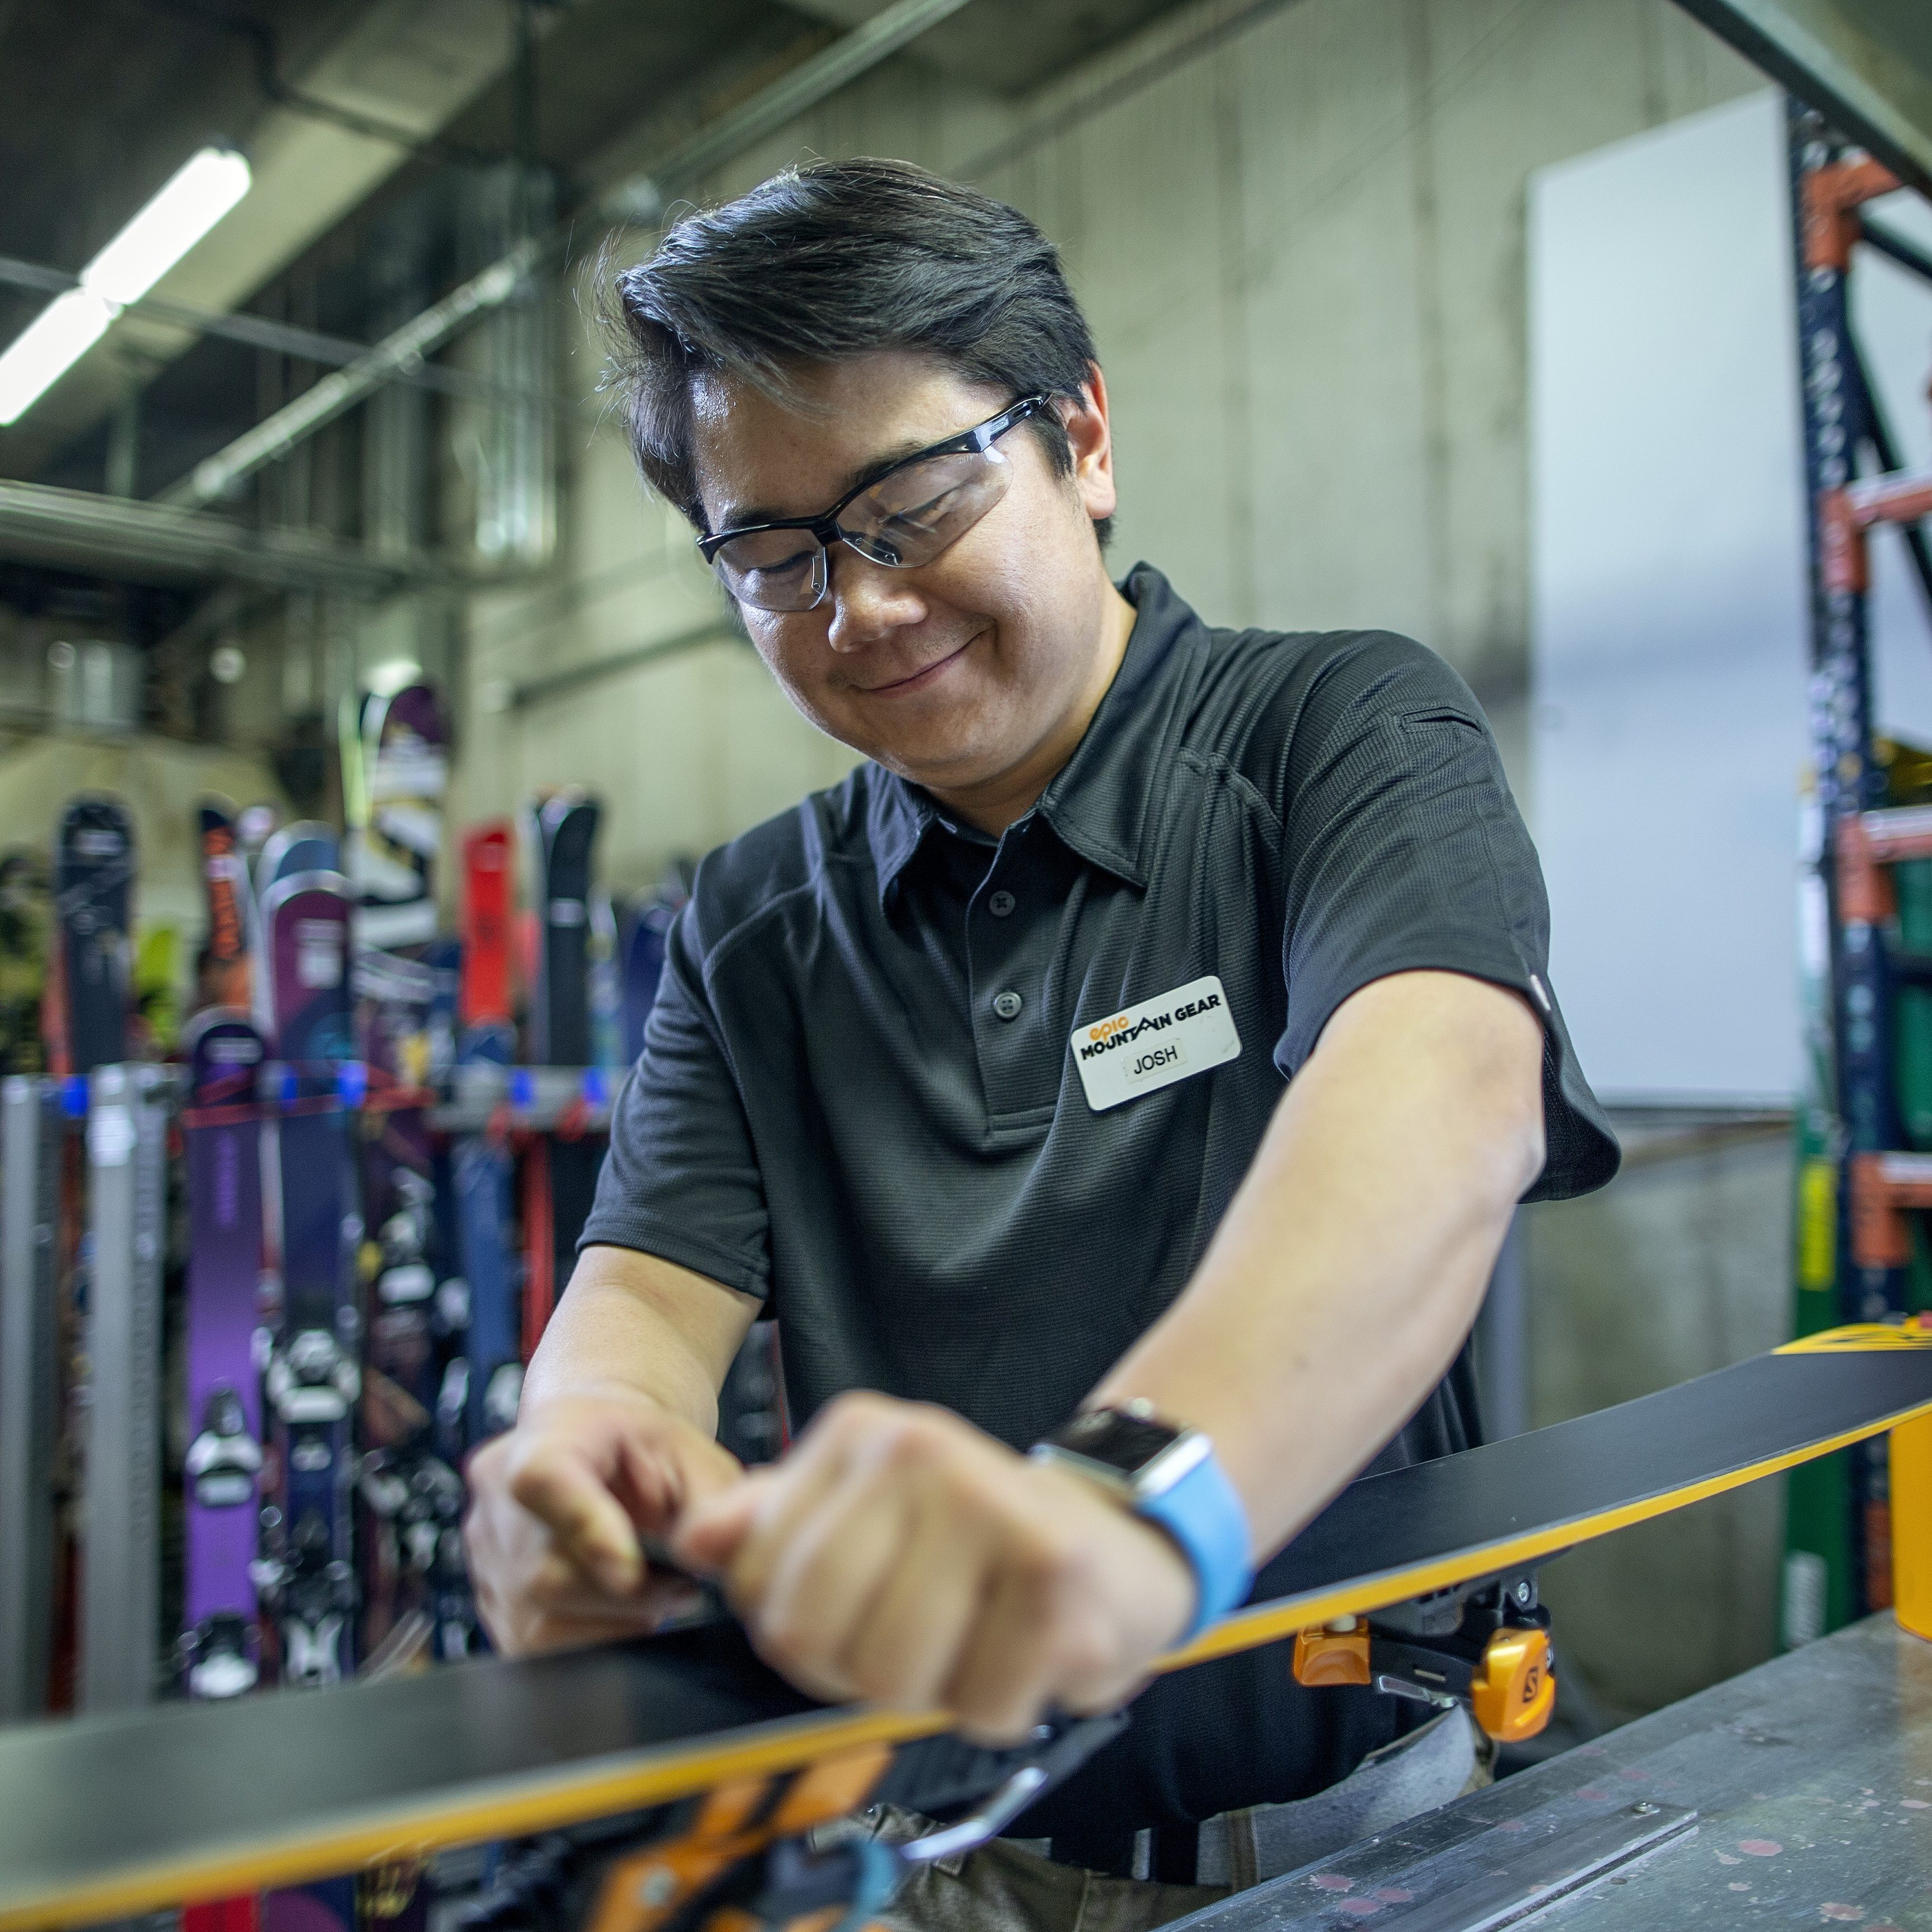 Ski tuning by an employee at Epic Mountain Gear